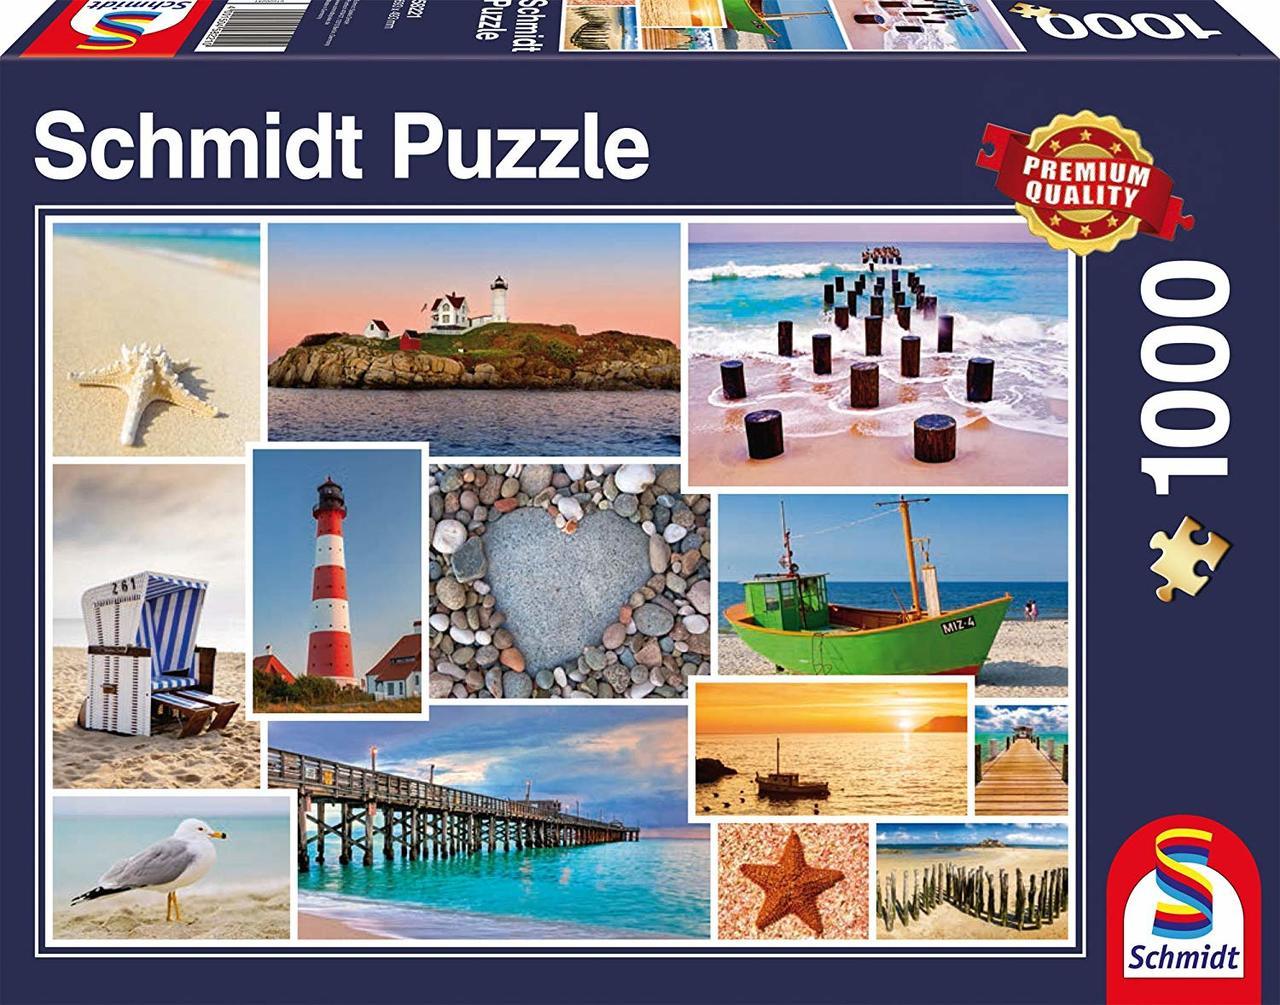 By the Sea - 1000pc Jigsaw Puzzle by Schmidt  			  					NEW - image 1